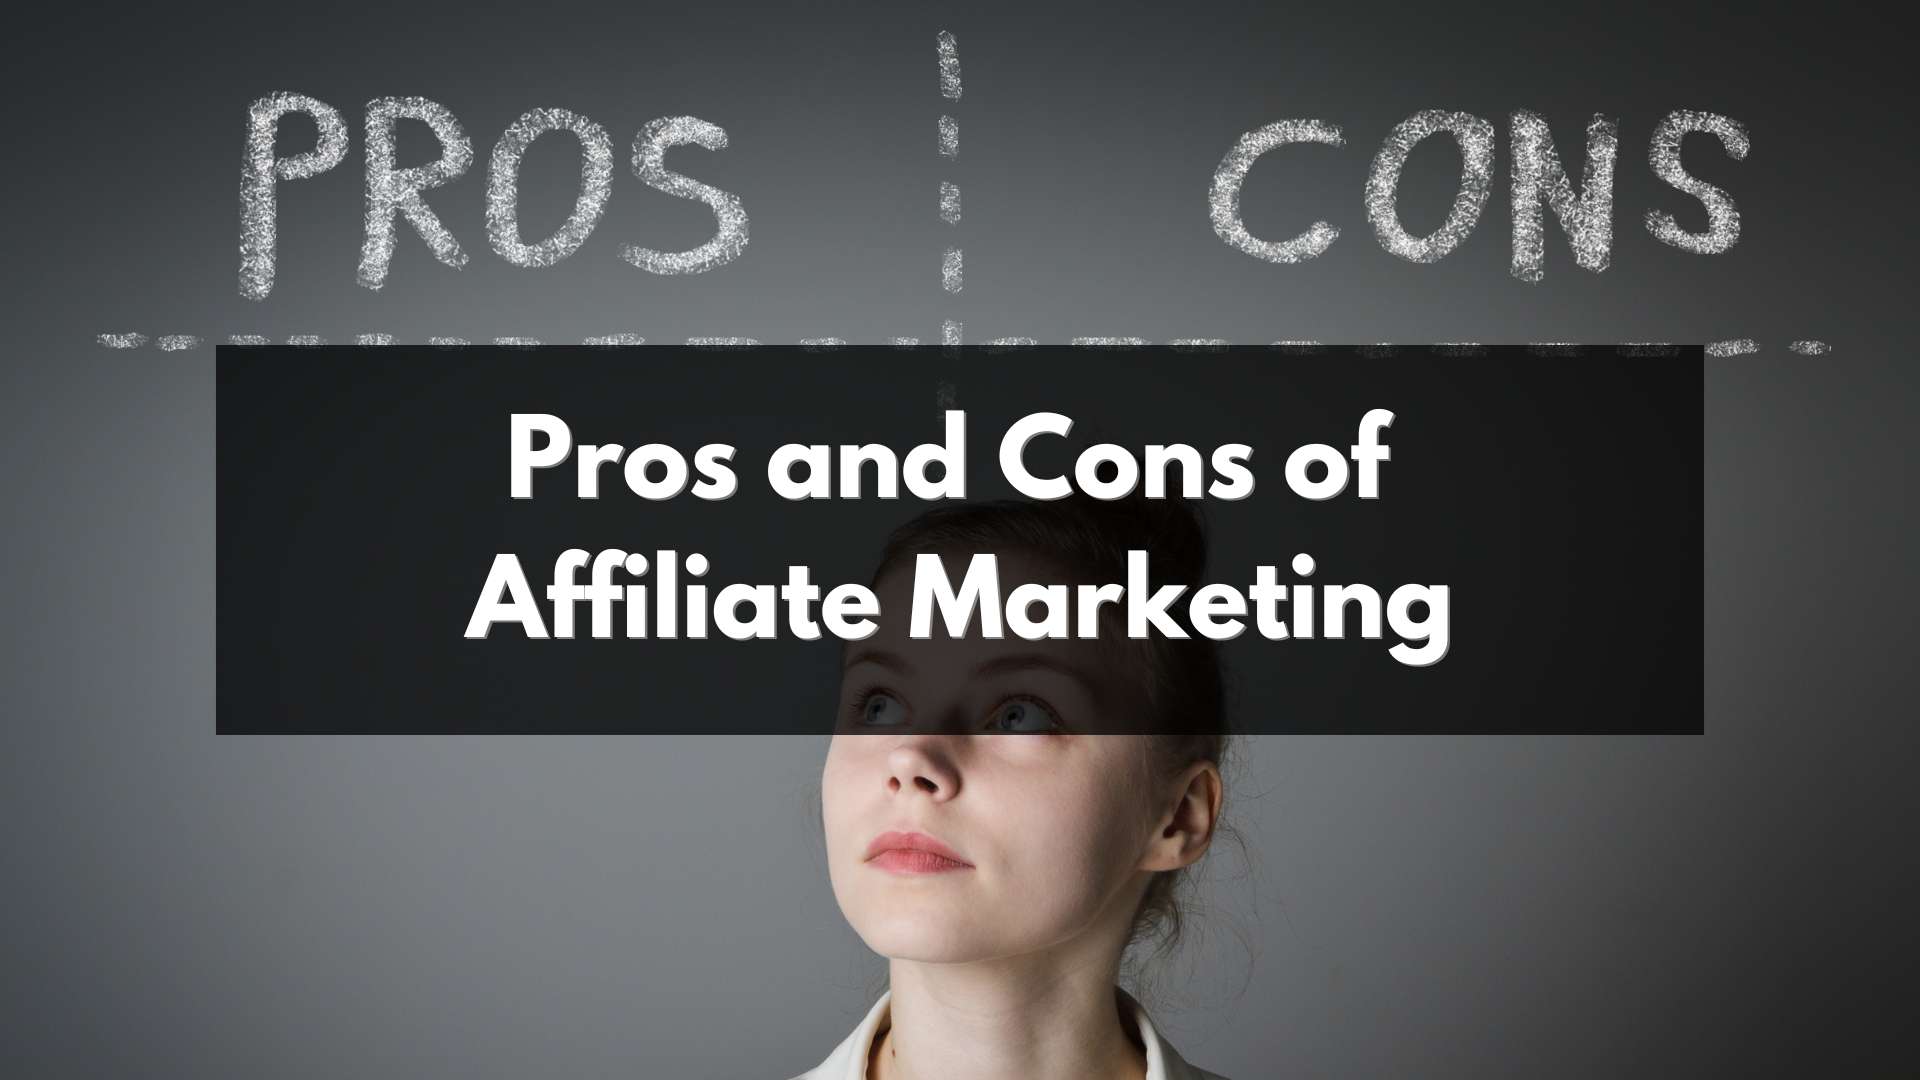 Pros and cons of affiliate marketing